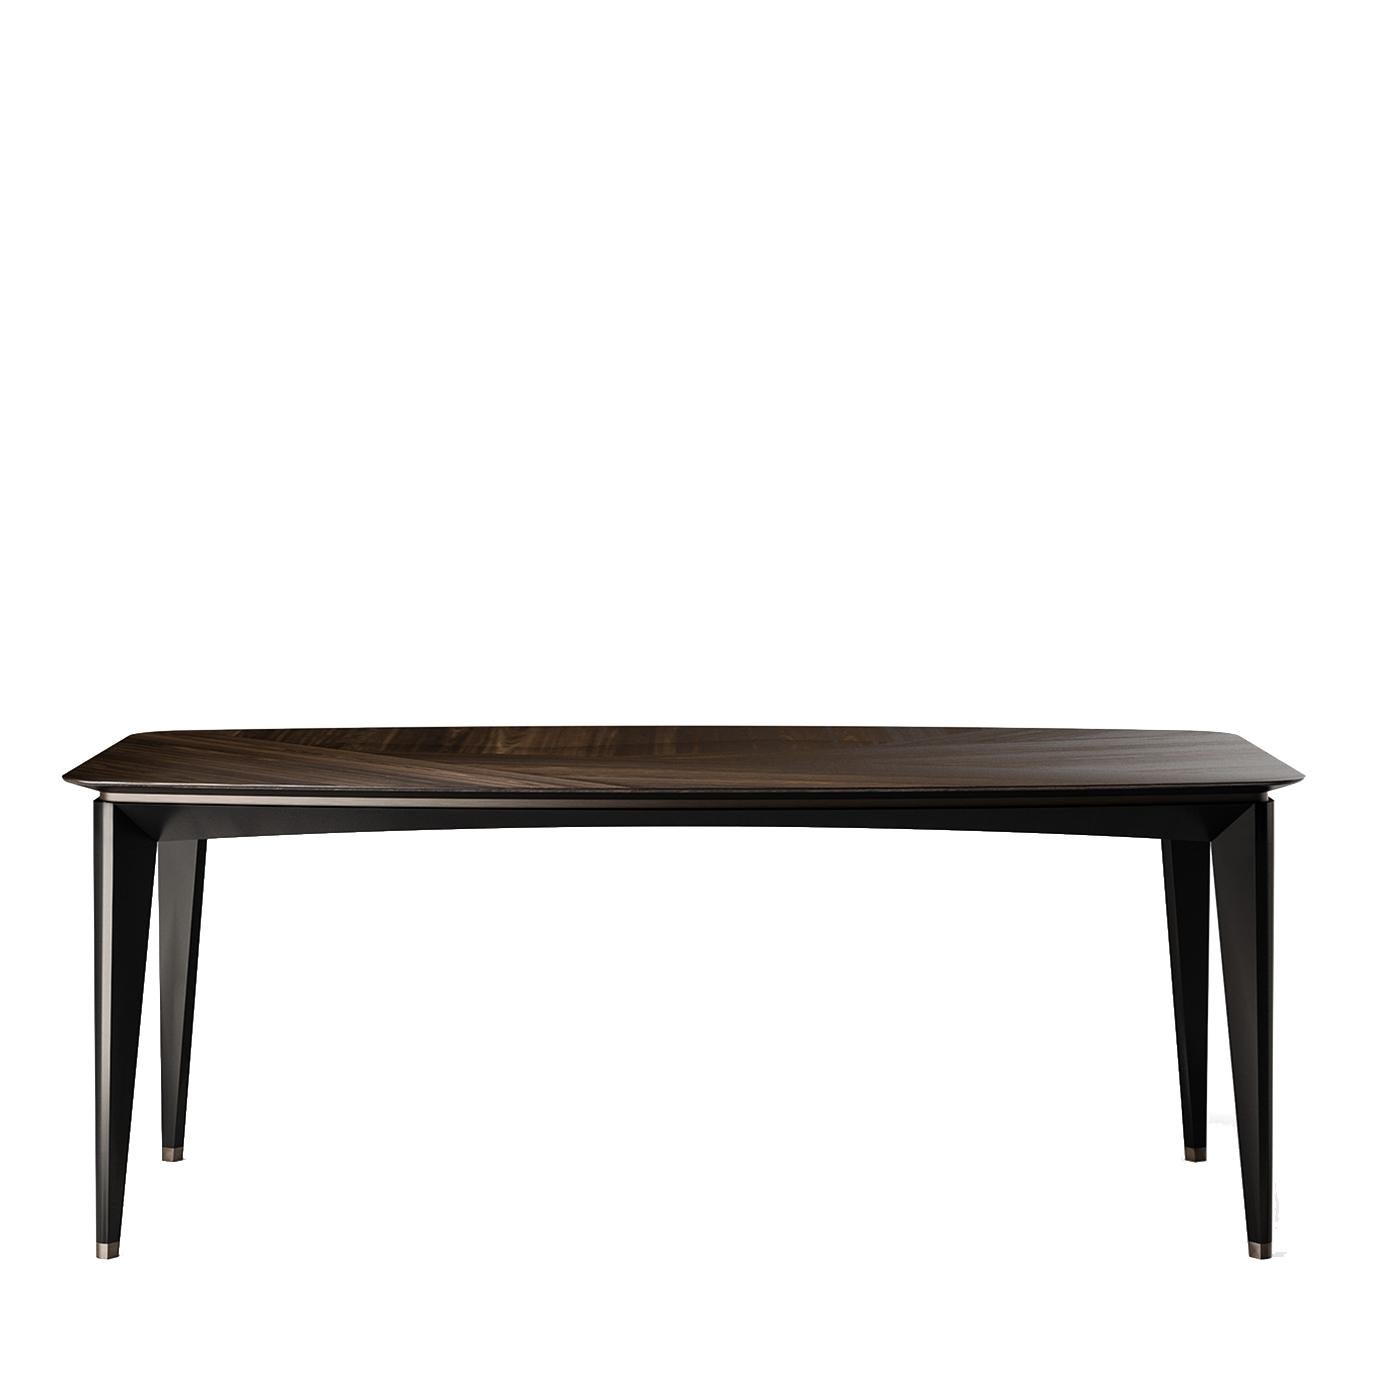 Italian Eclipse Rectangular Dining Table For Sale